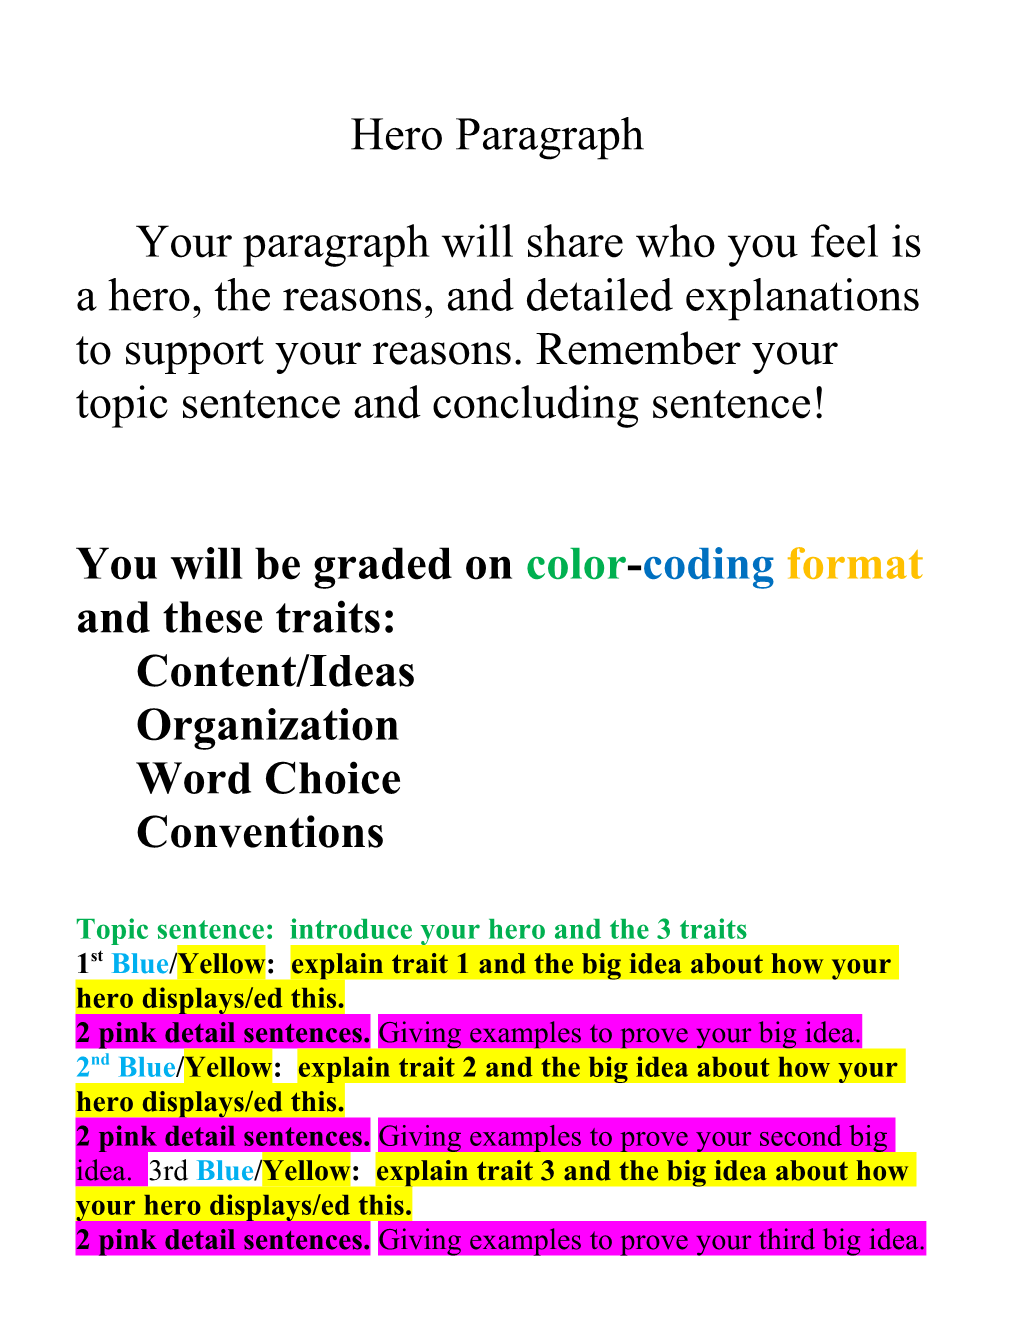 You Will Be Graded on Color-Coding Format and These Traits